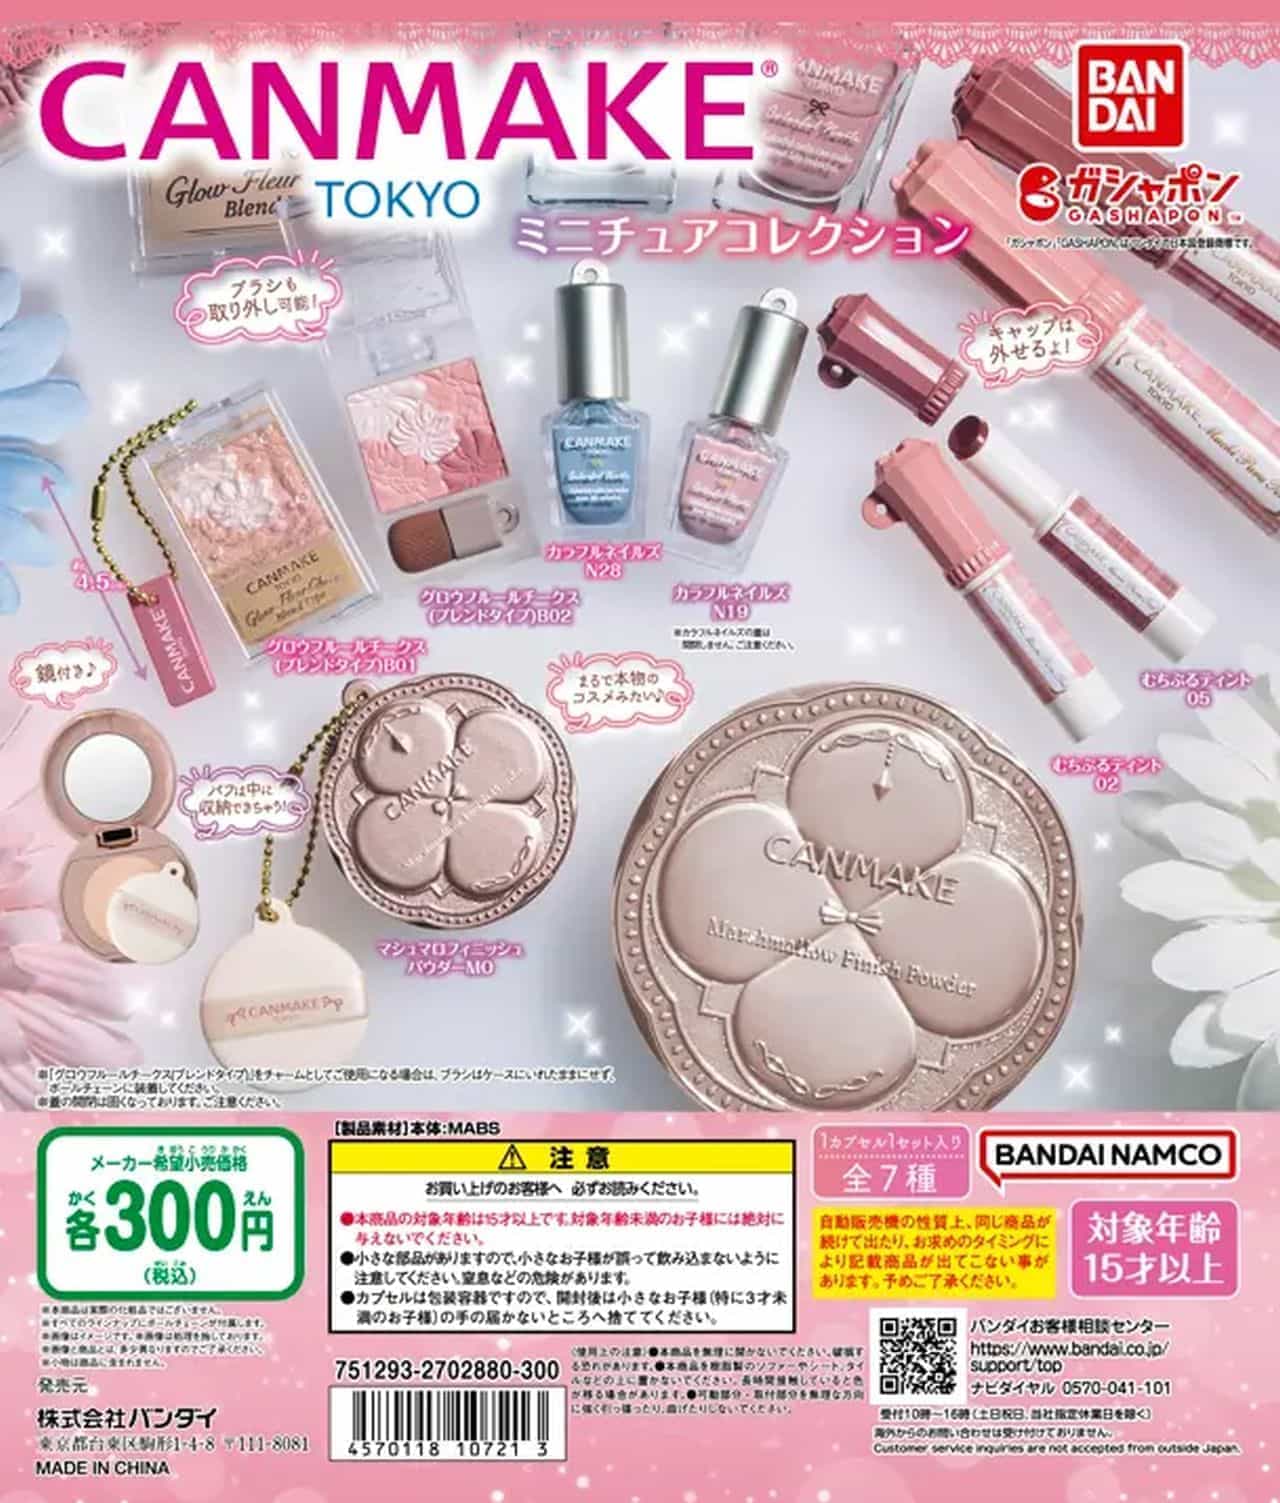 Gashapon “CANMAKE TOKYO Miniature Collection”